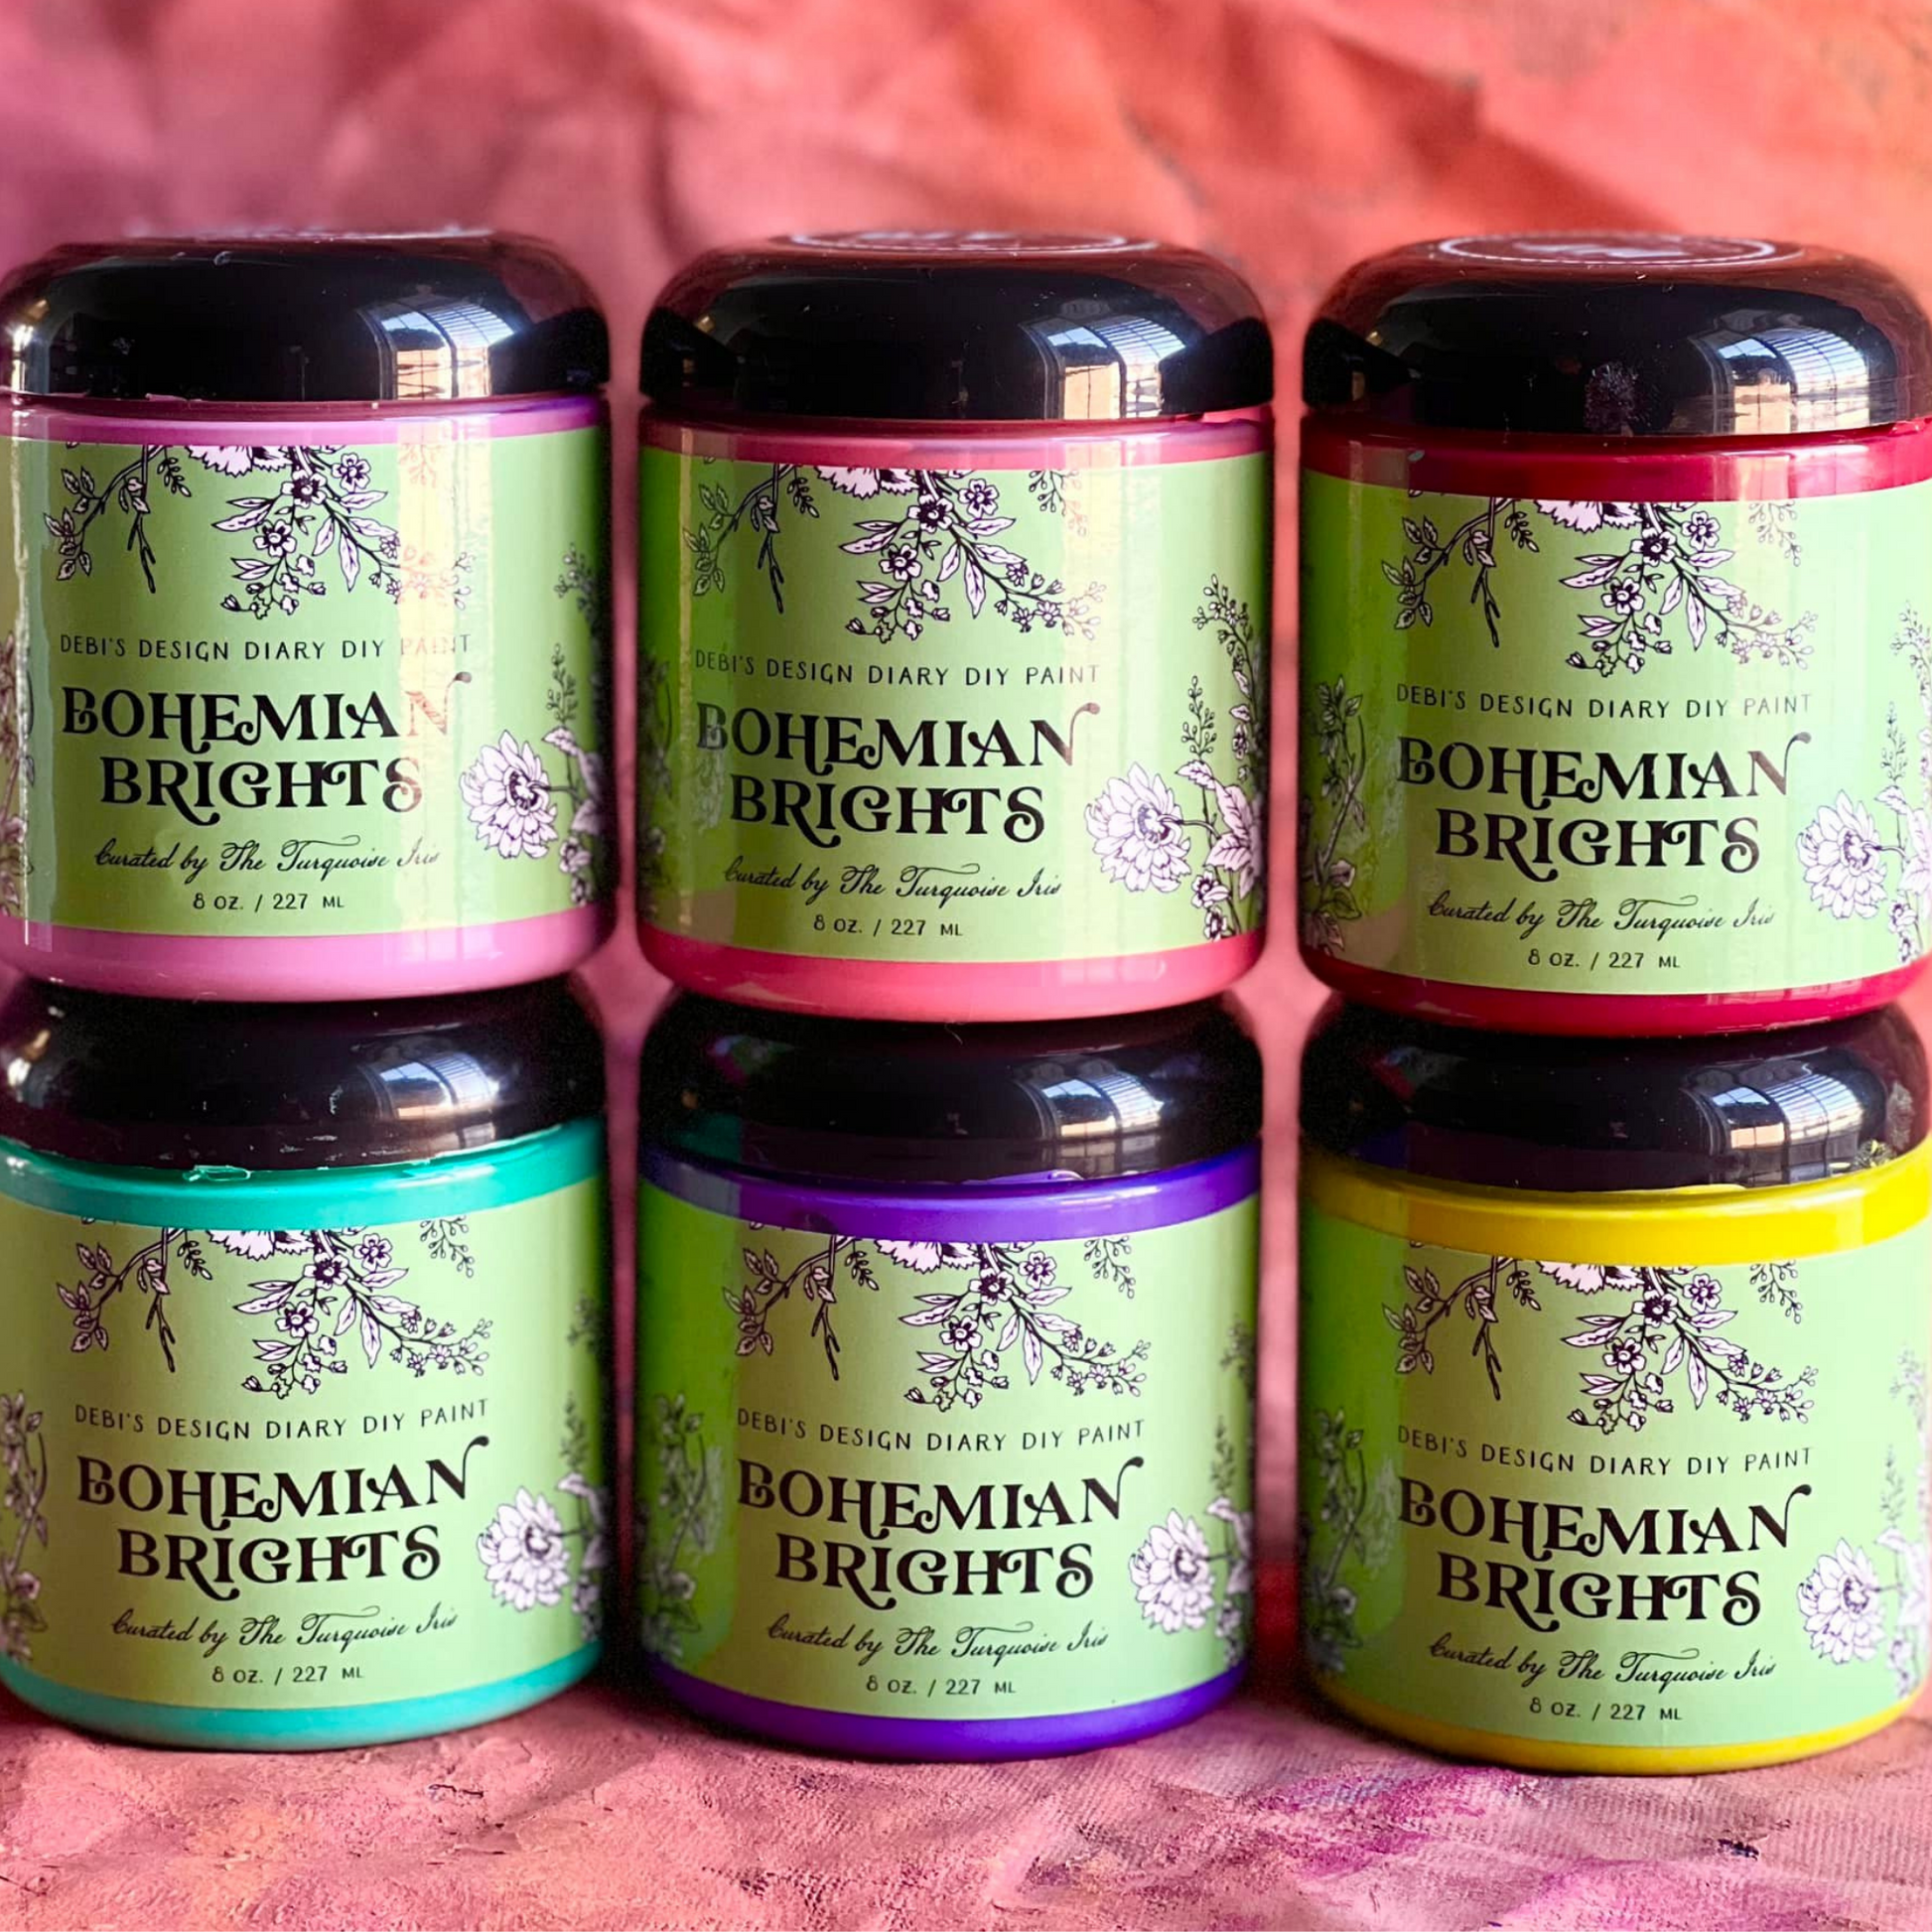 Bohemian Brights by Debi's Design Diary DIY Paint. 4 oz. jar available at Milton's Daughter. Curated by Dionne Woods of the Turquoise Iris.